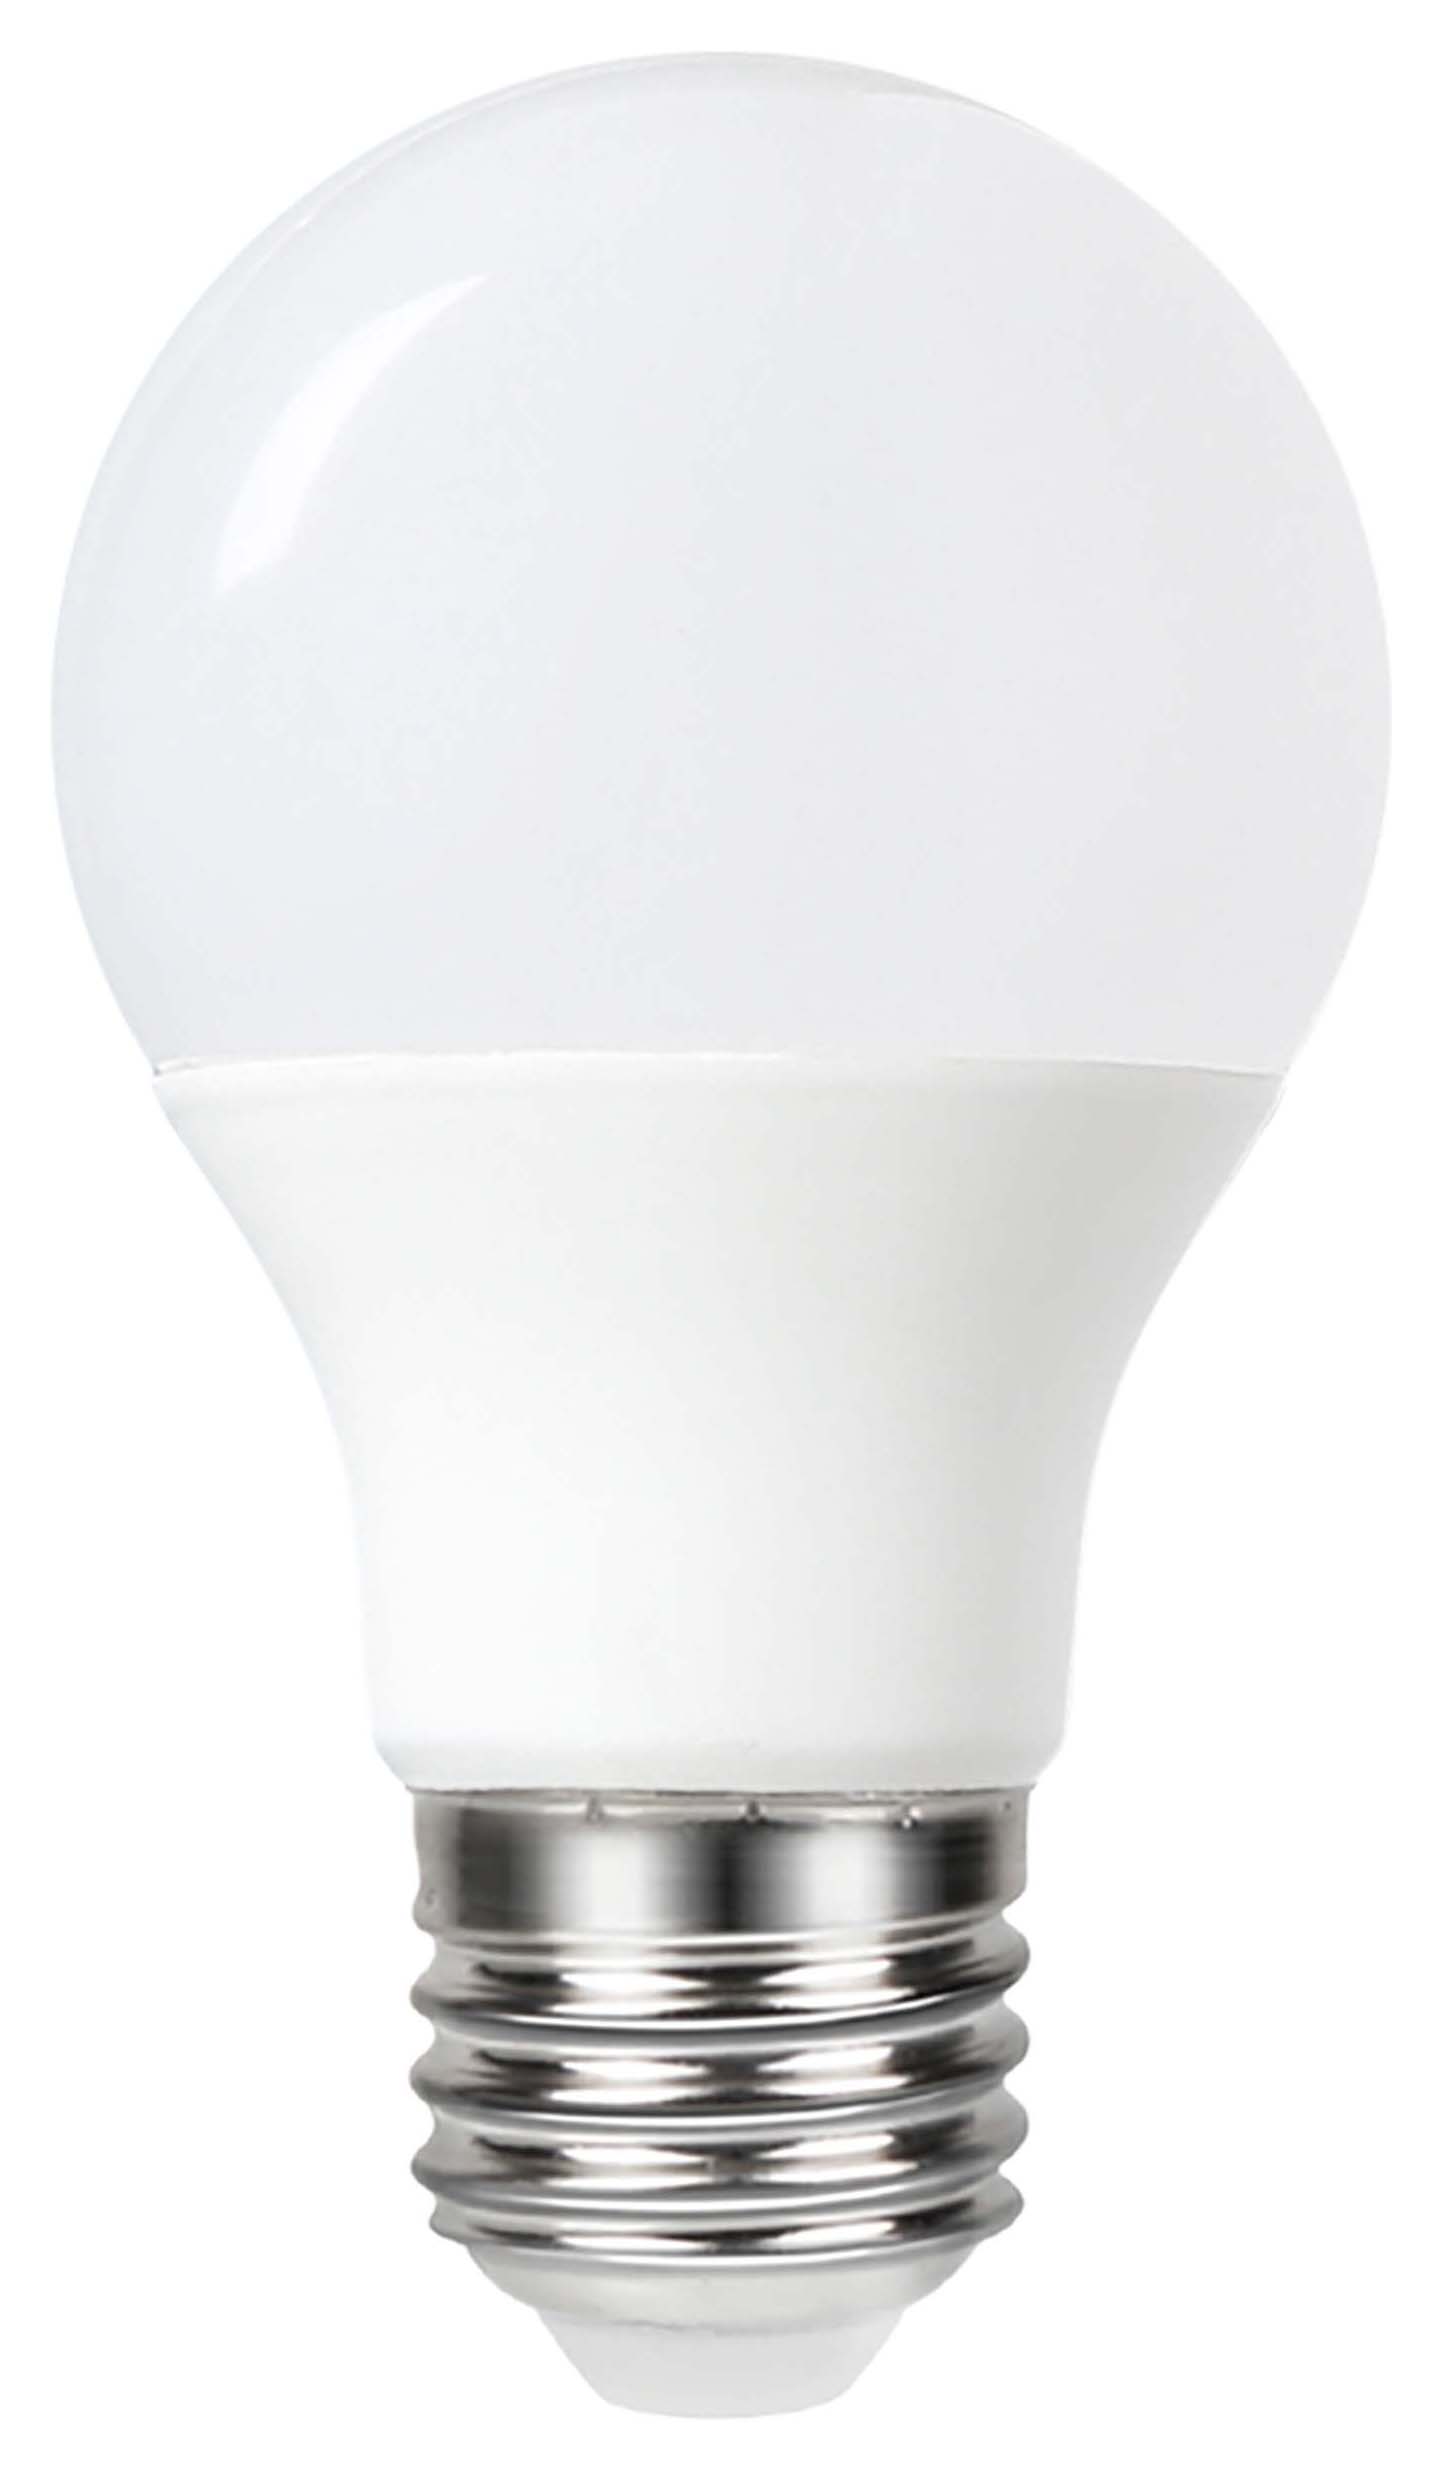 Image of Wickes Non-Dimmable GLS Opal LED E27 8.8W Cool White Light Bulb